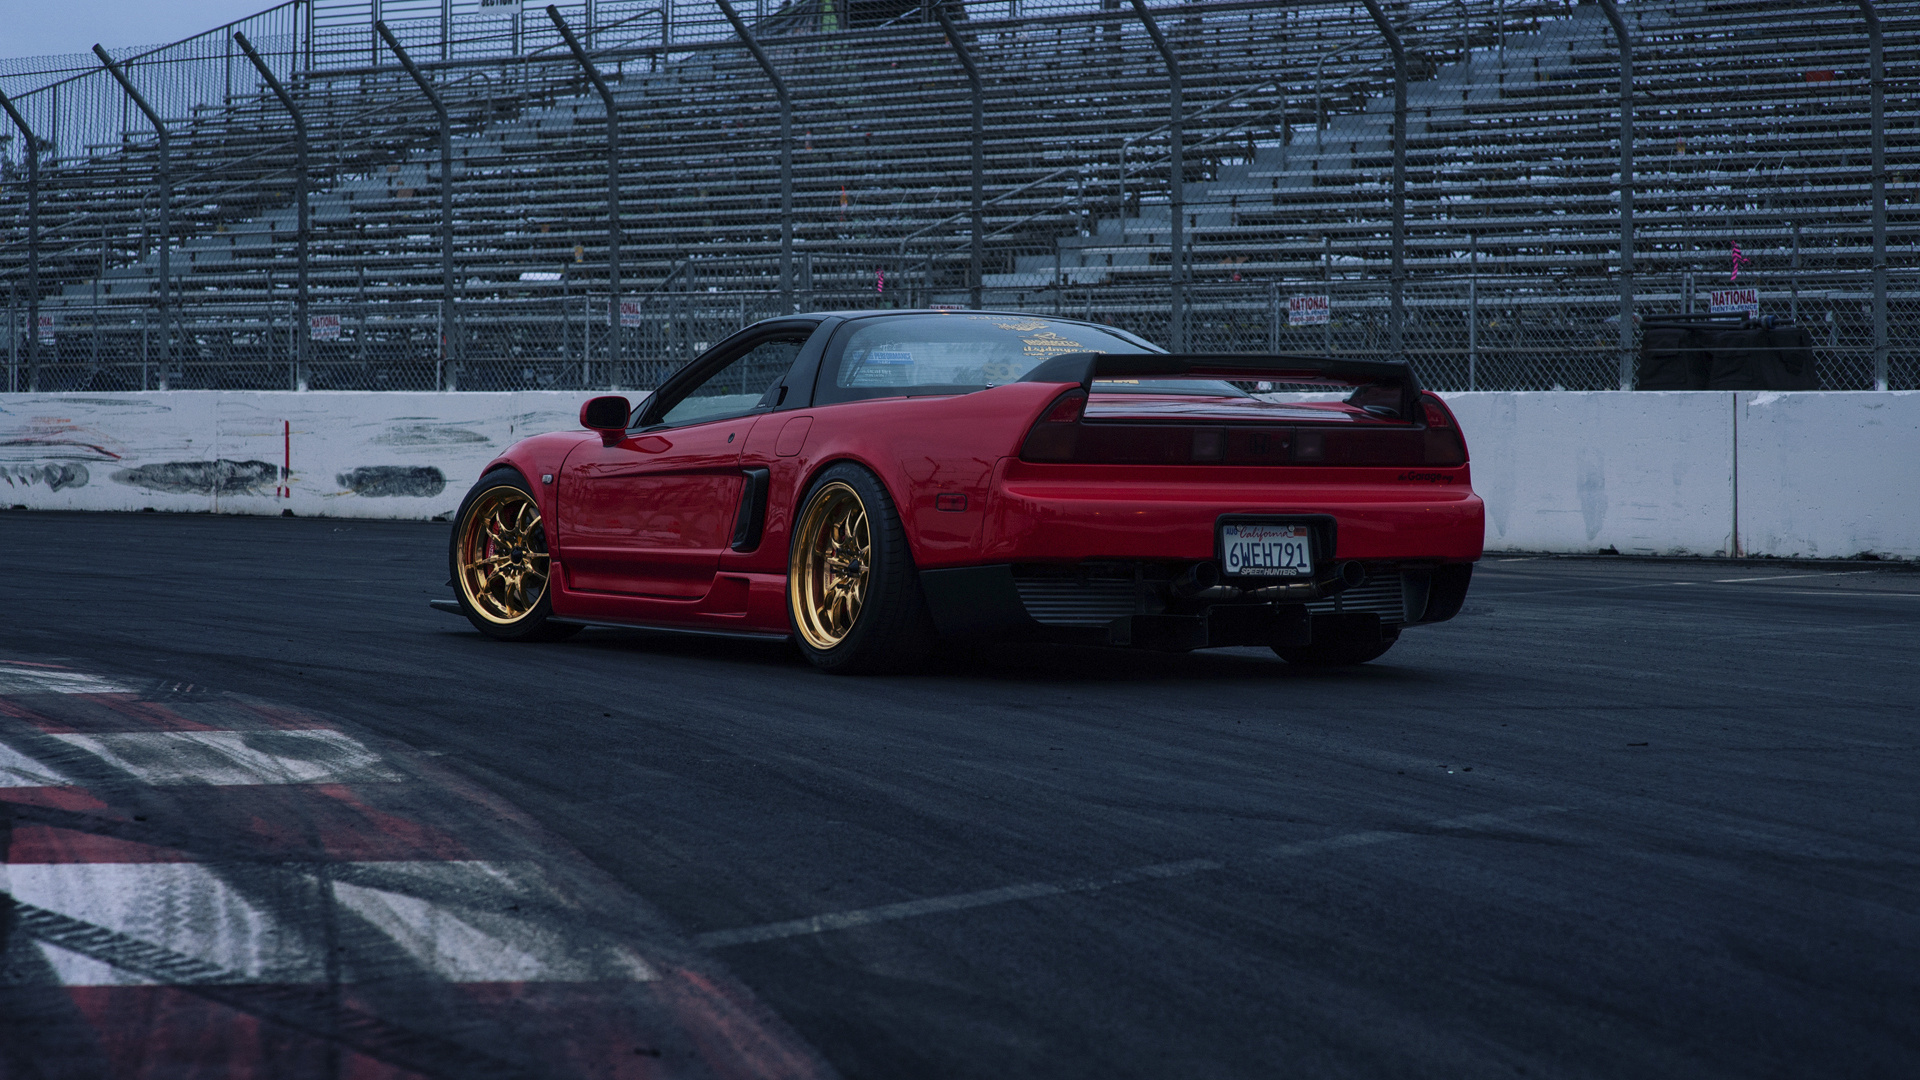 Honda NSX, wallpaper collection, high-quality images, automotive excellence, 1920x1080 Full HD Desktop